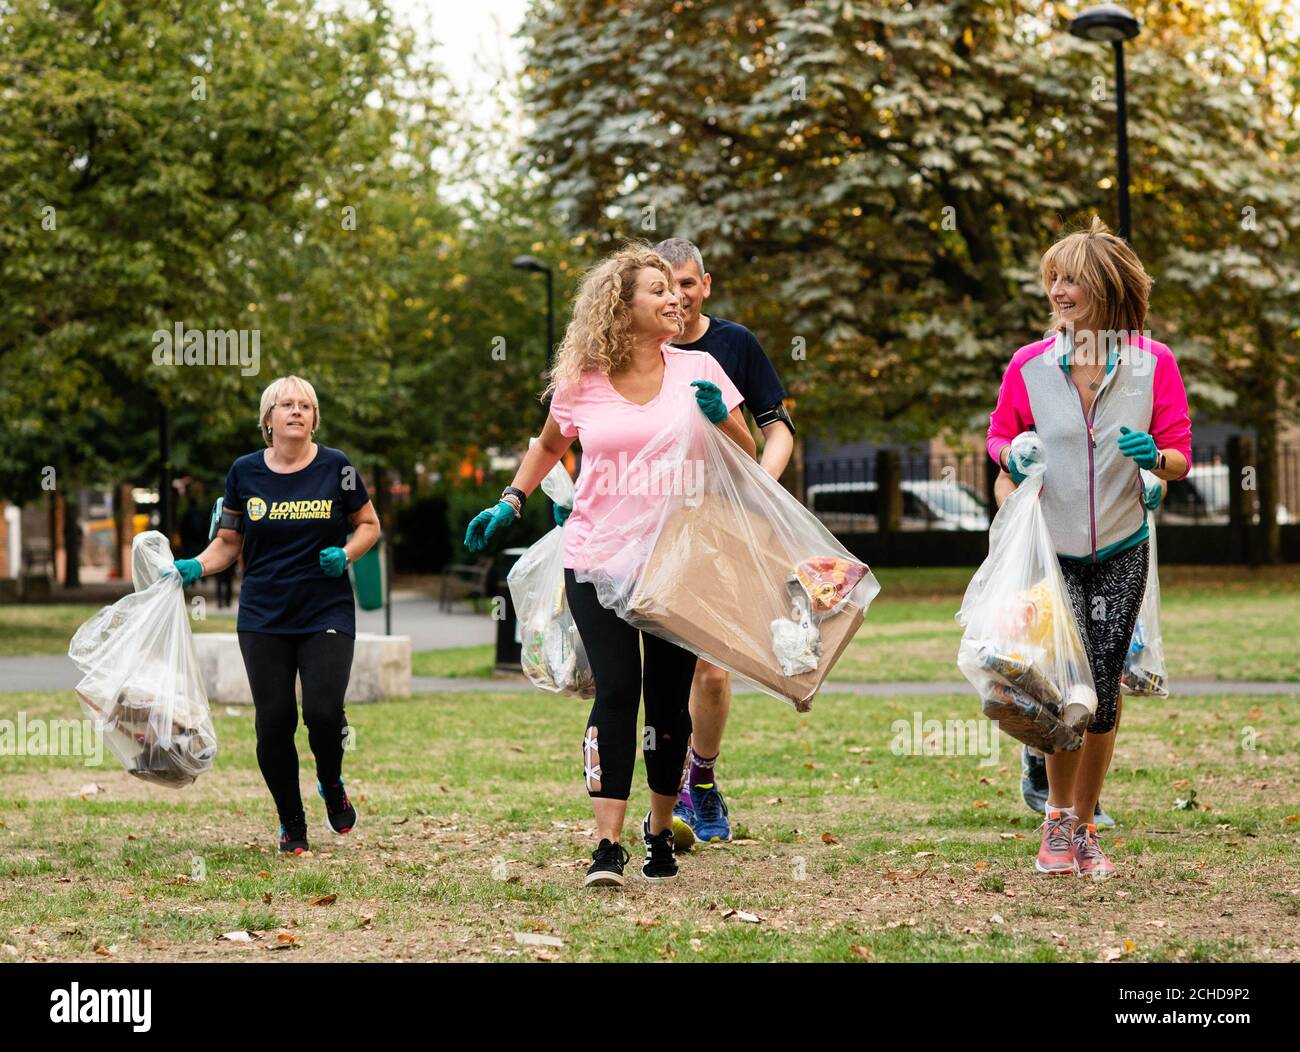 EDITORIAL USE ONLY Nadia Sawalha and Kaye Adams (right) go 'Plogging', which is a Scandinavian fitness trend where people pick up plastic whilst out walking or running, with Fitbit and London City Runners in support of WasteAid, in central London. Stock Photo